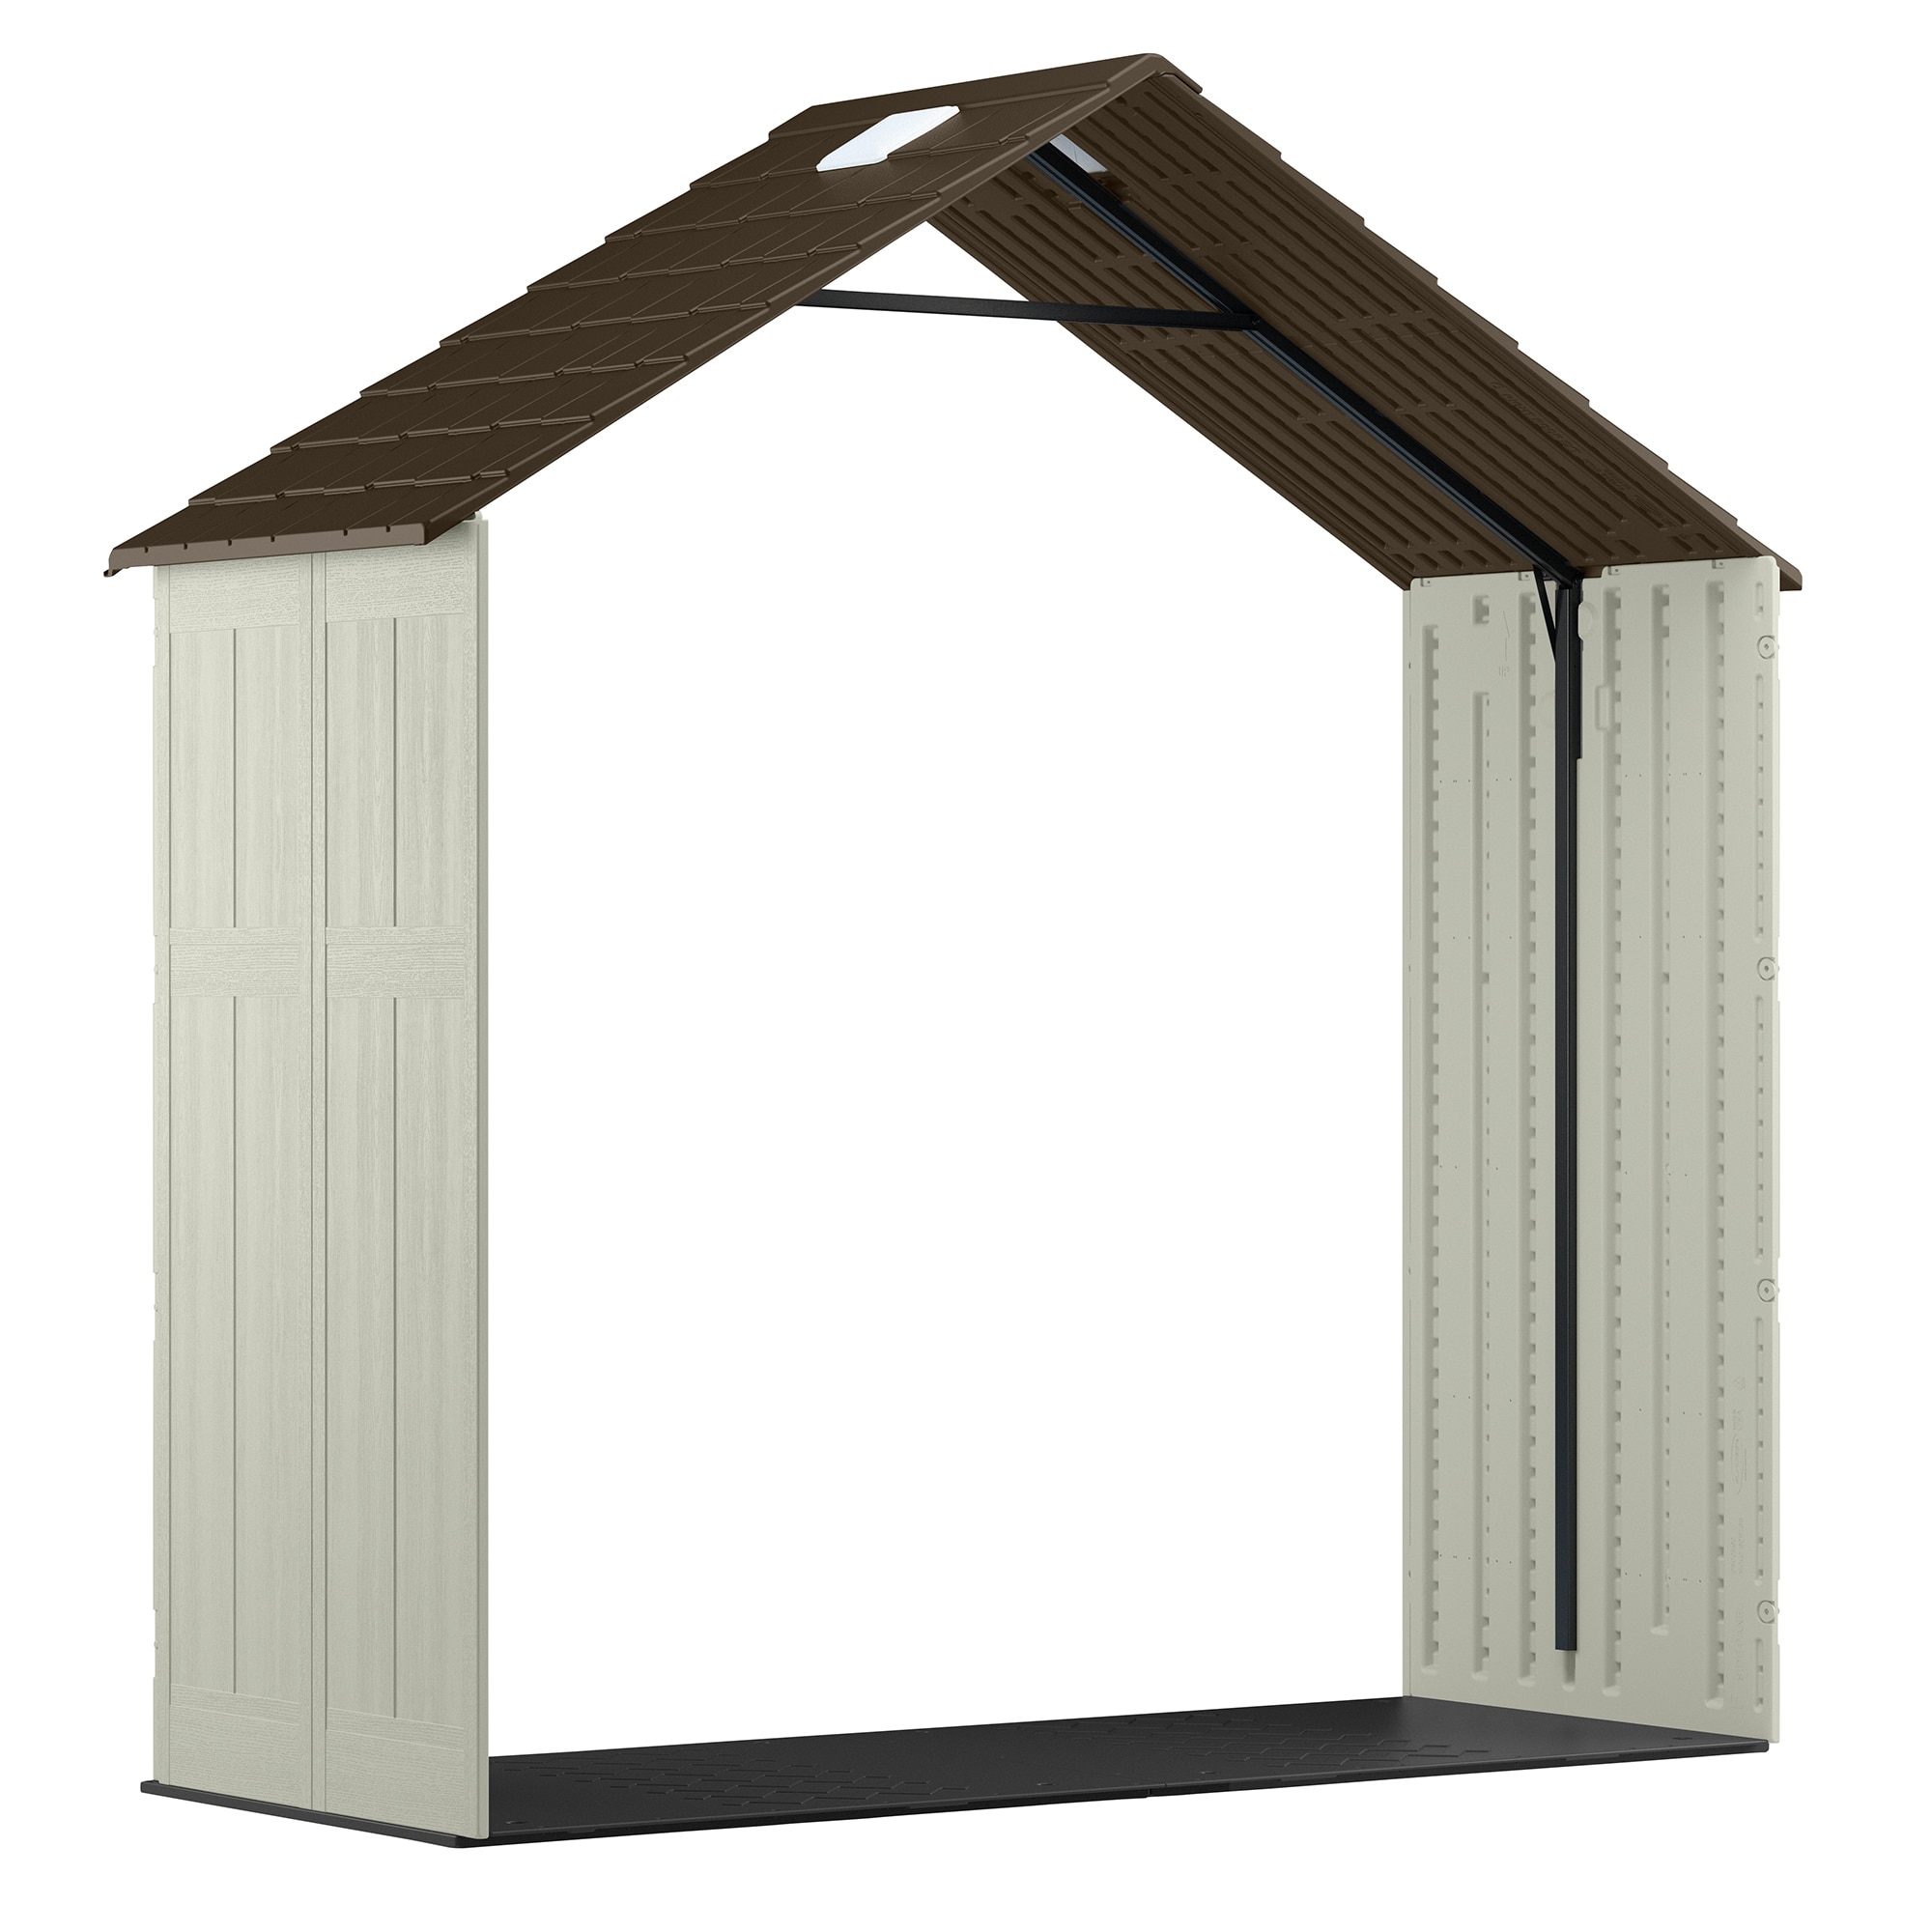 Suncast 8 Ft X 3 Ft Resin Storage Shed Expansion Kit In The Storage